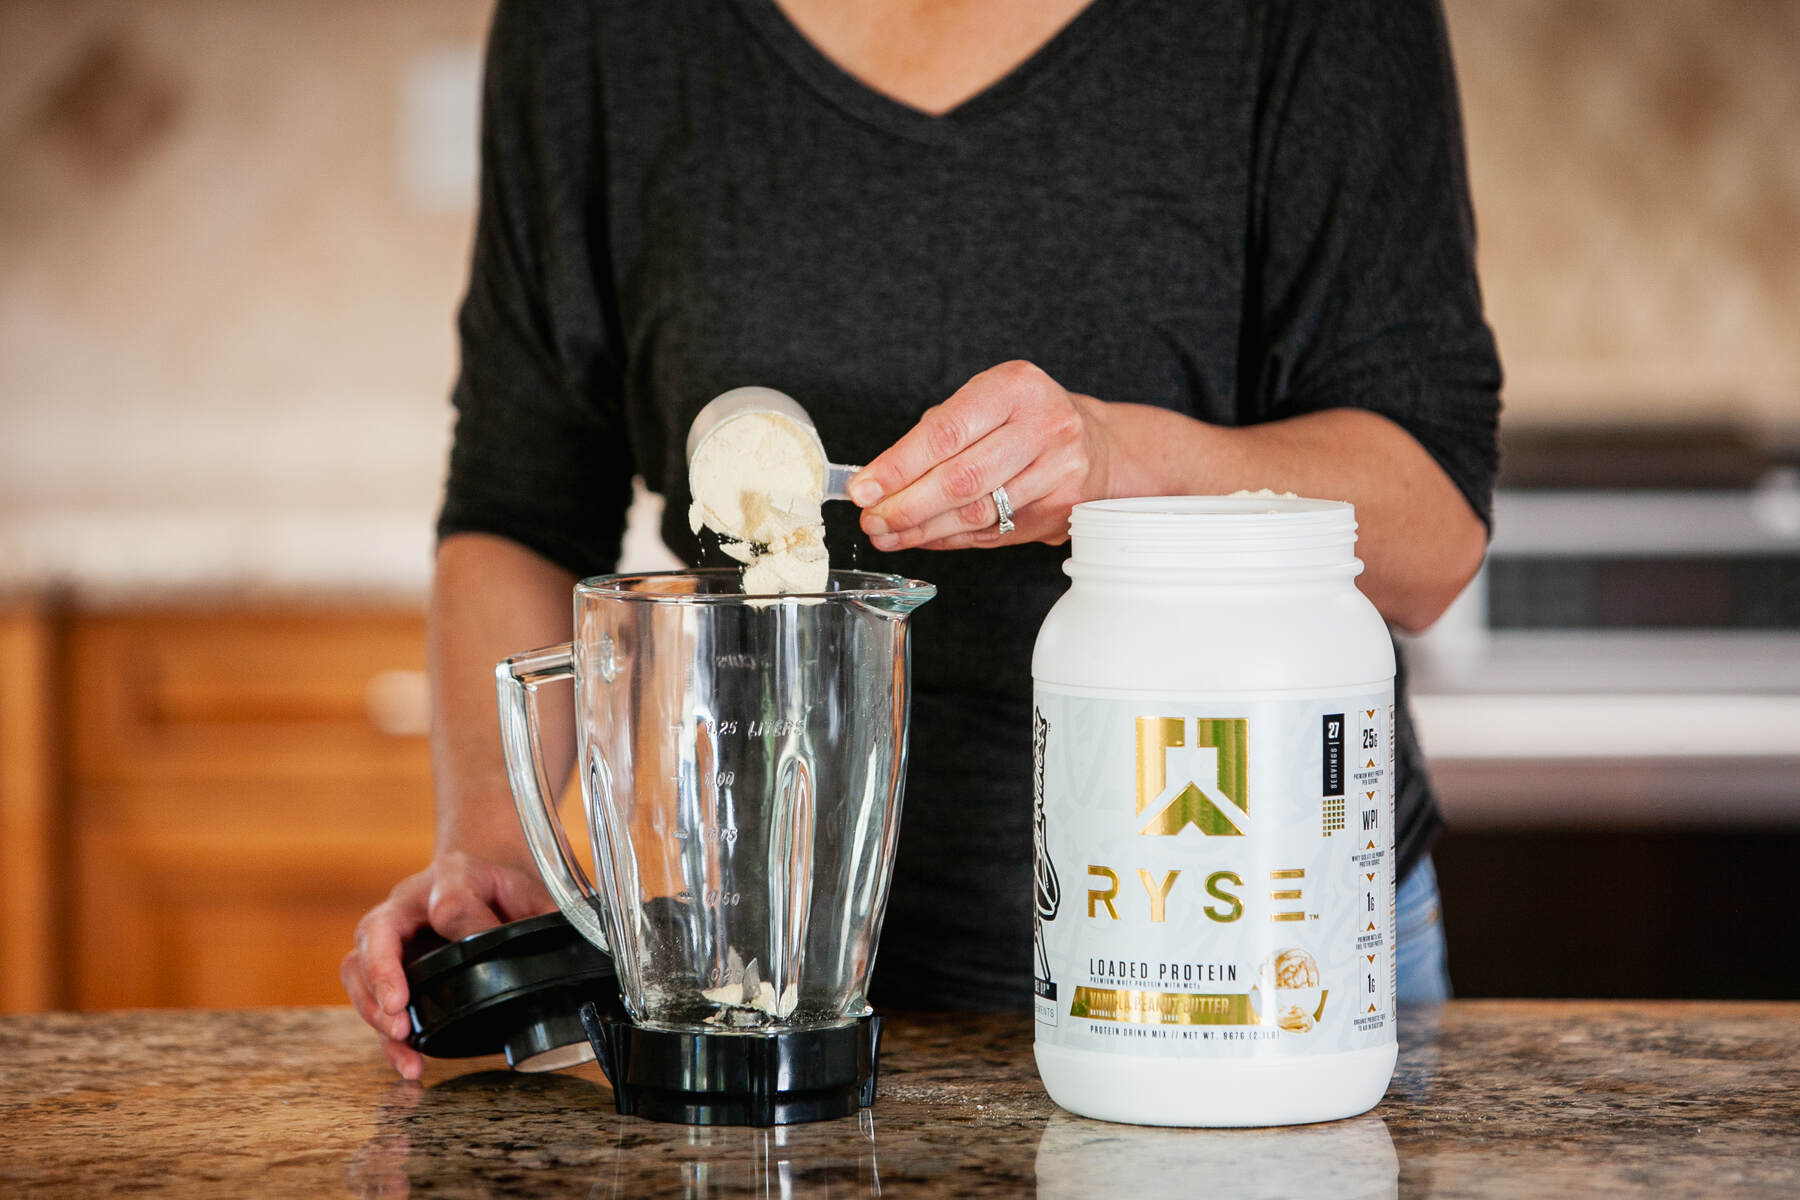 A person in a black top is pouring vanilla peanut butter flavored RYSE Loaded Protein powder into a blender, with the container placed on a kitchen counter